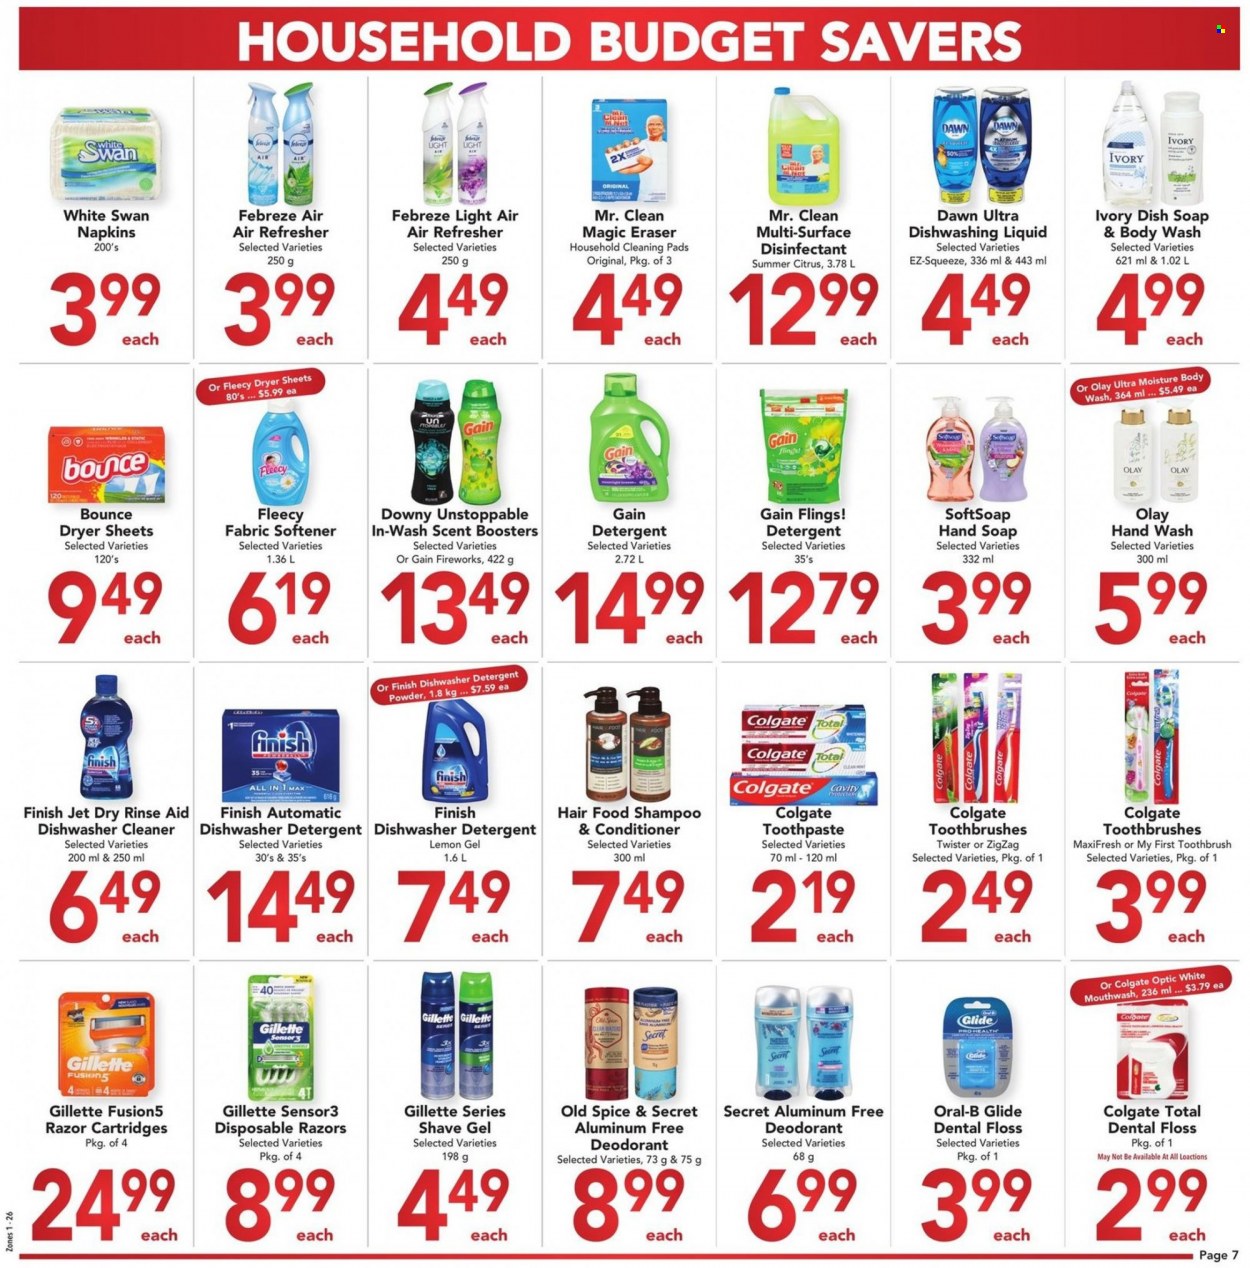 thumbnail - Buy-Low Foods Flyer - June 26, 2022 - July 23, 2022 - Sales products - spice, napkins, Febreze, Gain, cleaner, cleaning pad, fabric softener, laundry powder, Bounce, dryer sheets, scent booster, Gain Fireworks, dishwashing liquid, dishwasher cleaner, Jet, body wash, Softsoap, hand soap, hand wash, soap, toothbrush, toothpaste, mouthwash, Gillette, Olay, conditioner, refresher, anti-perspirant, shave gel, disposable razor, detergent, Colgate, shampoo, Old Spice, Oral-B, Twister, desinfection, deodorant. Page 7.